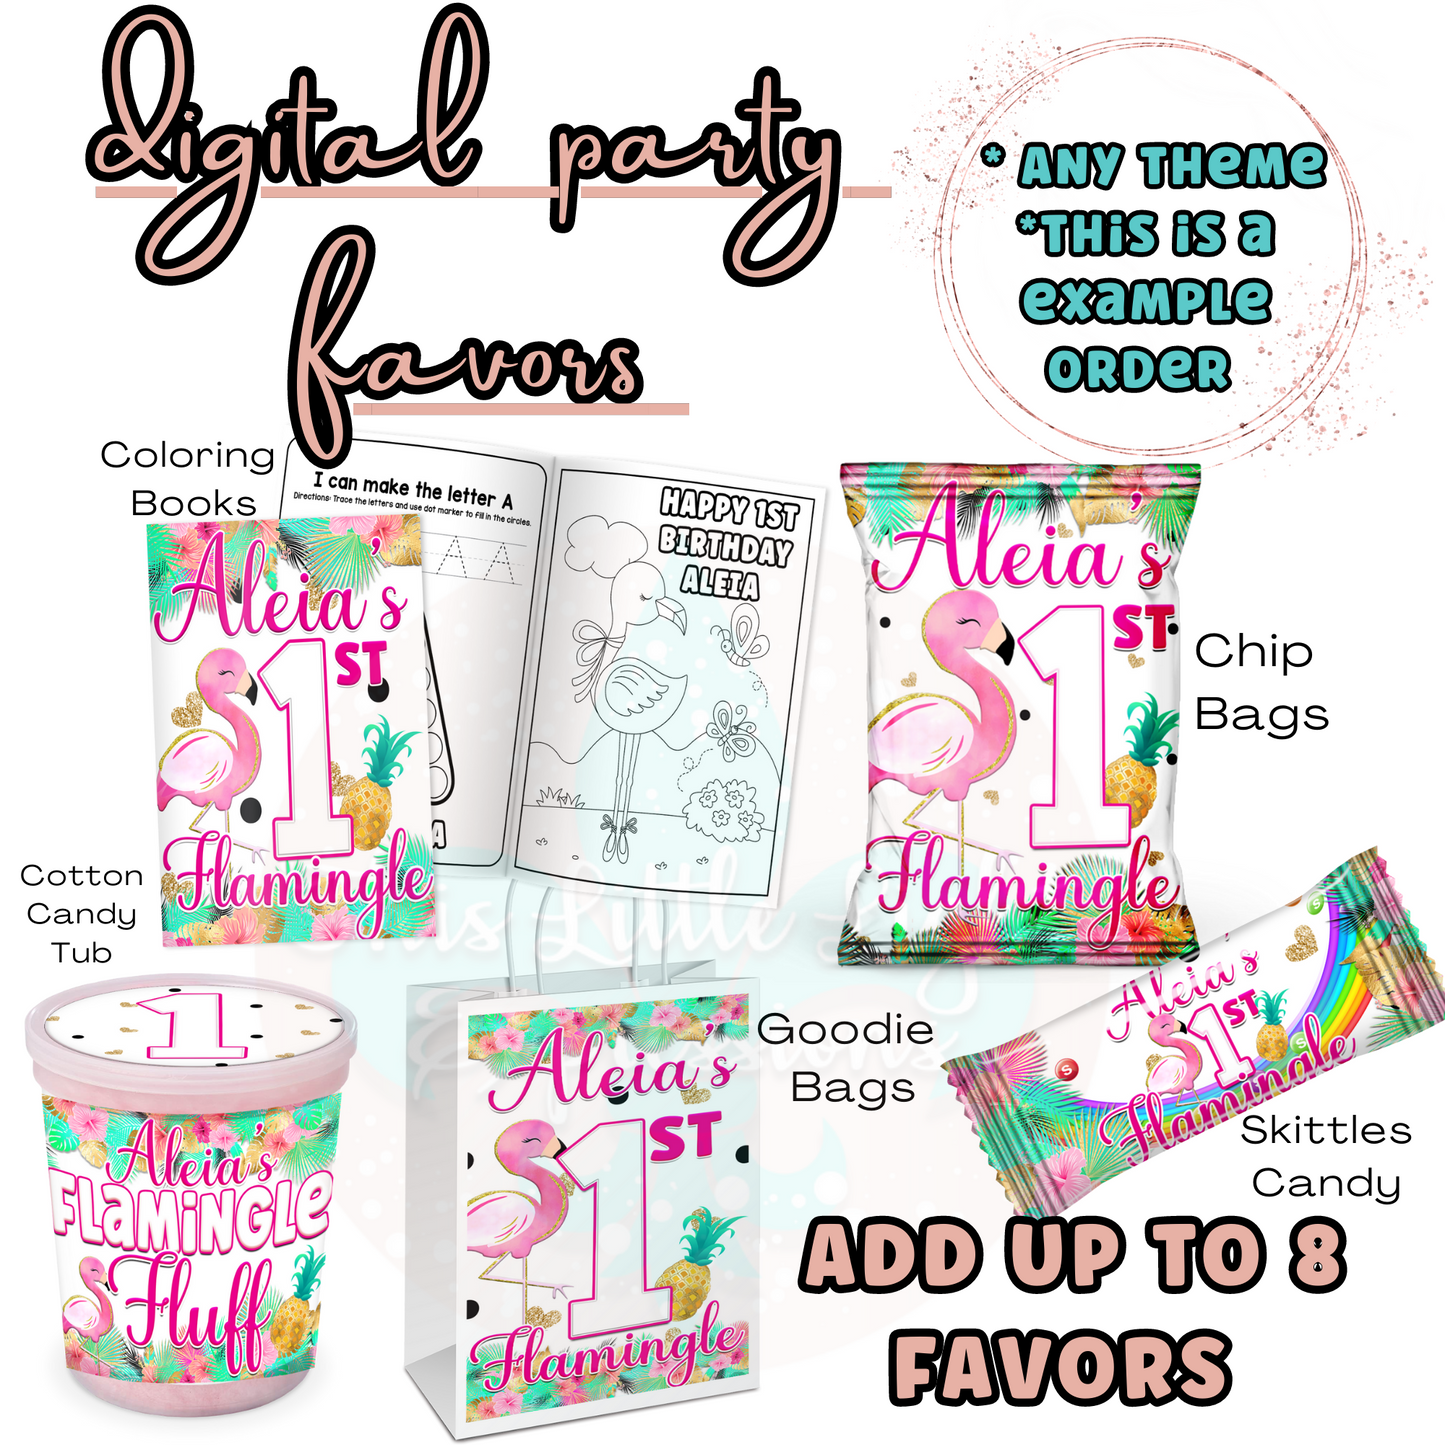 Digital Party Favors | Download Only | Favor List in Photo Examples